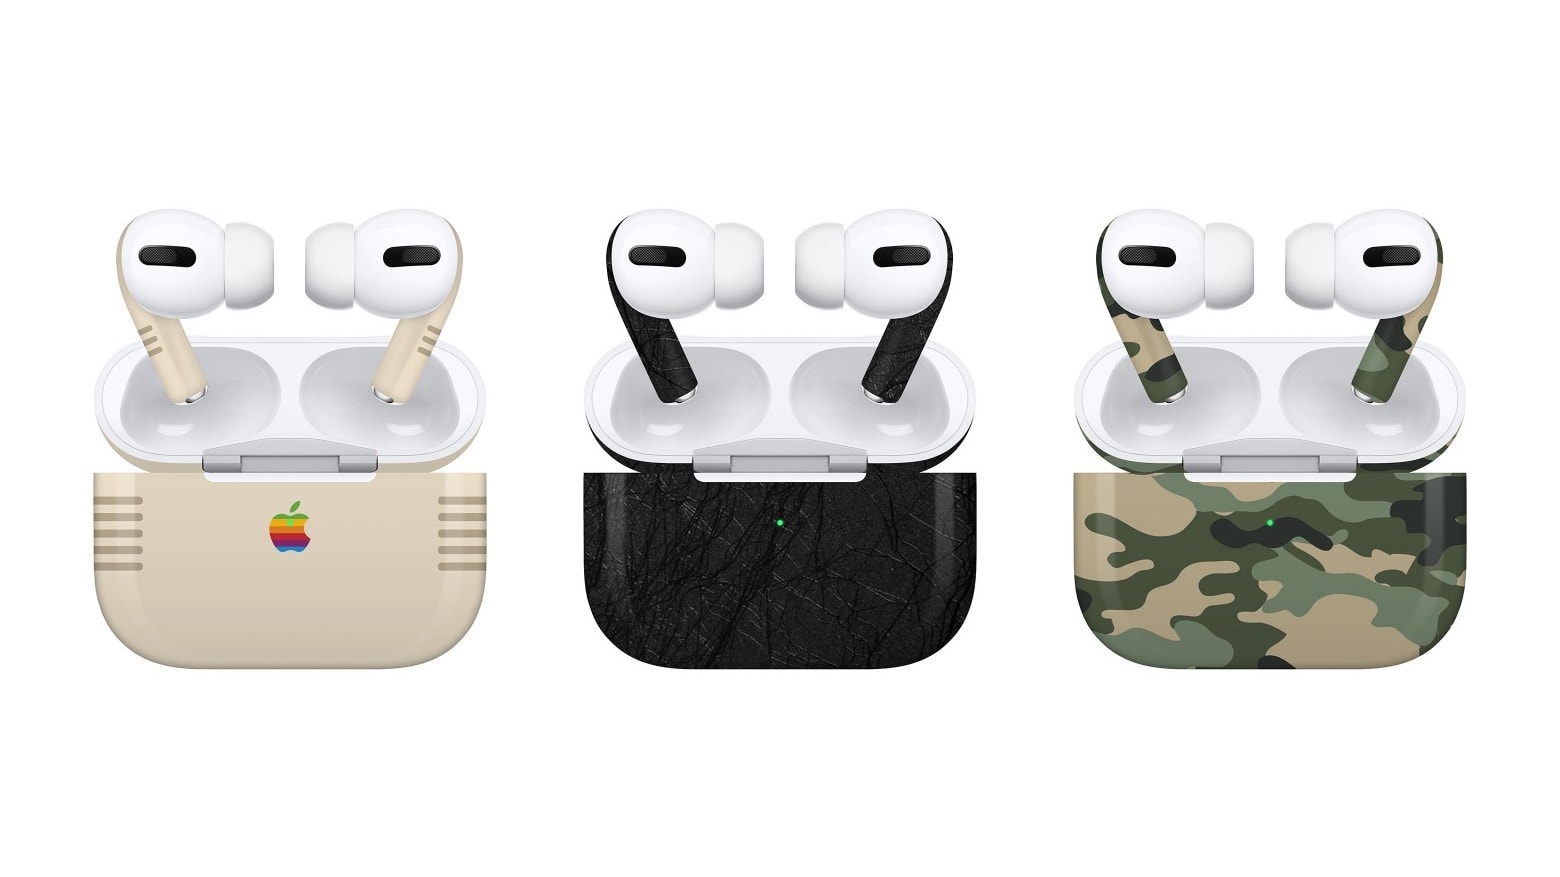 Pen pal tense traffic Slickwraps Skins bring style to plain AirPods Pro | Cult of Mac